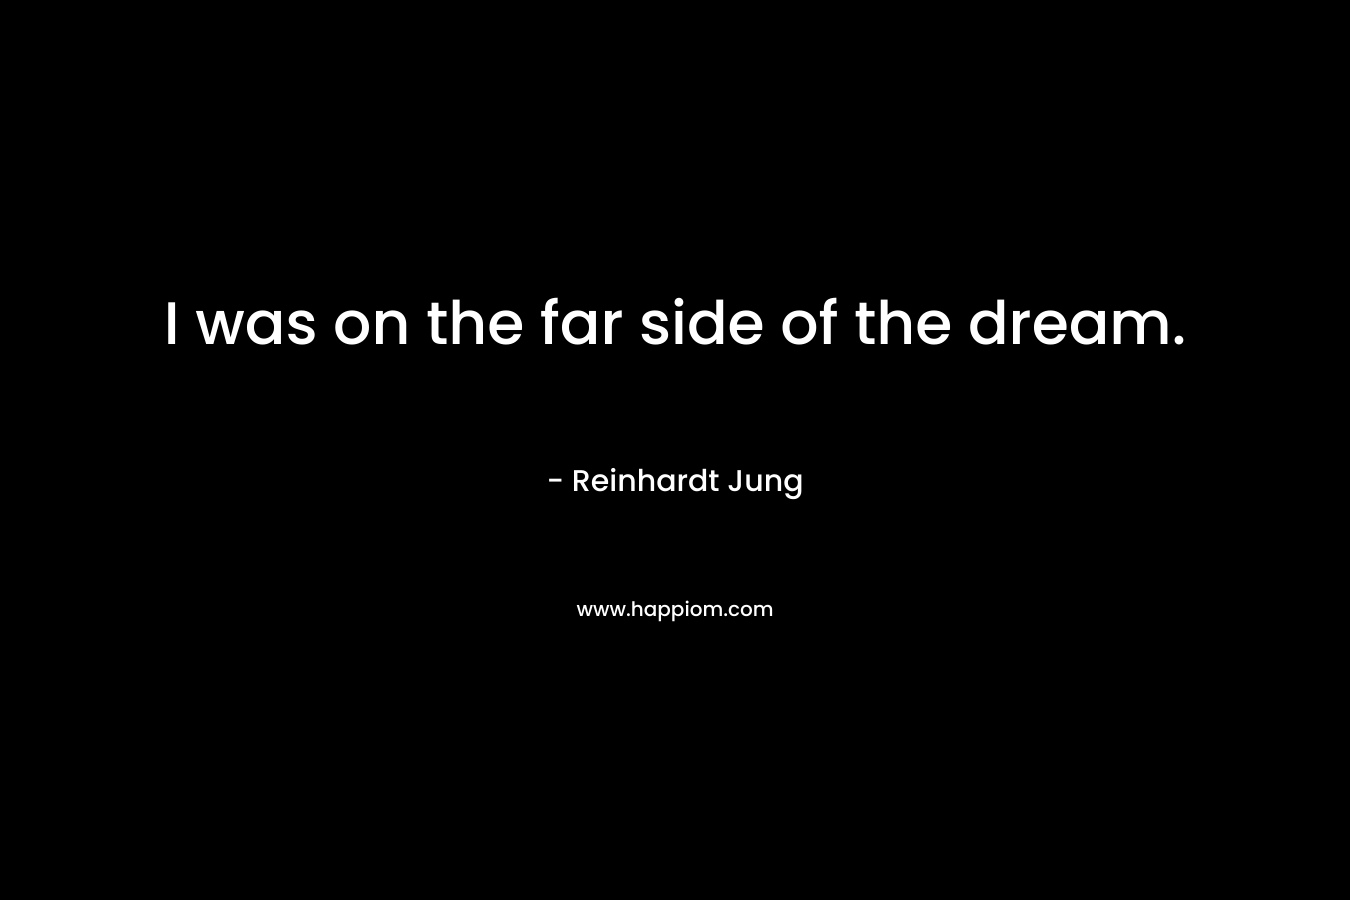 I was on the far side of the dream. – Reinhardt Jung